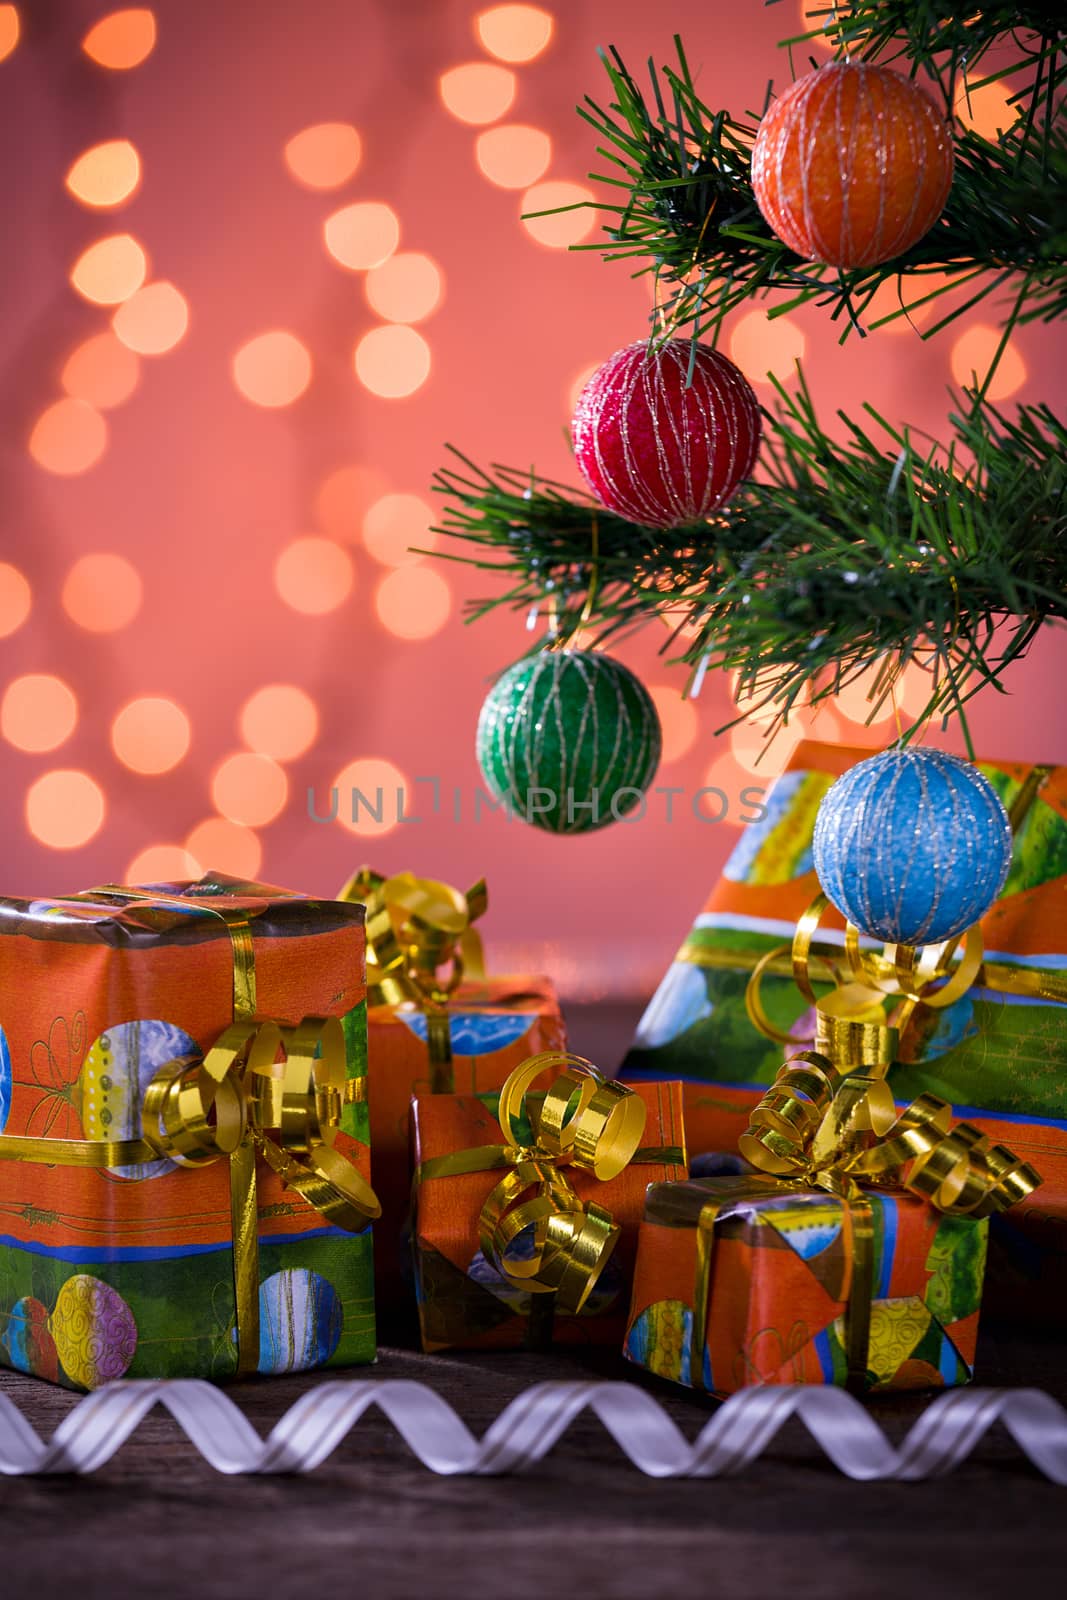 Christmas gifts with blurred lights on background and ribbon under the tree